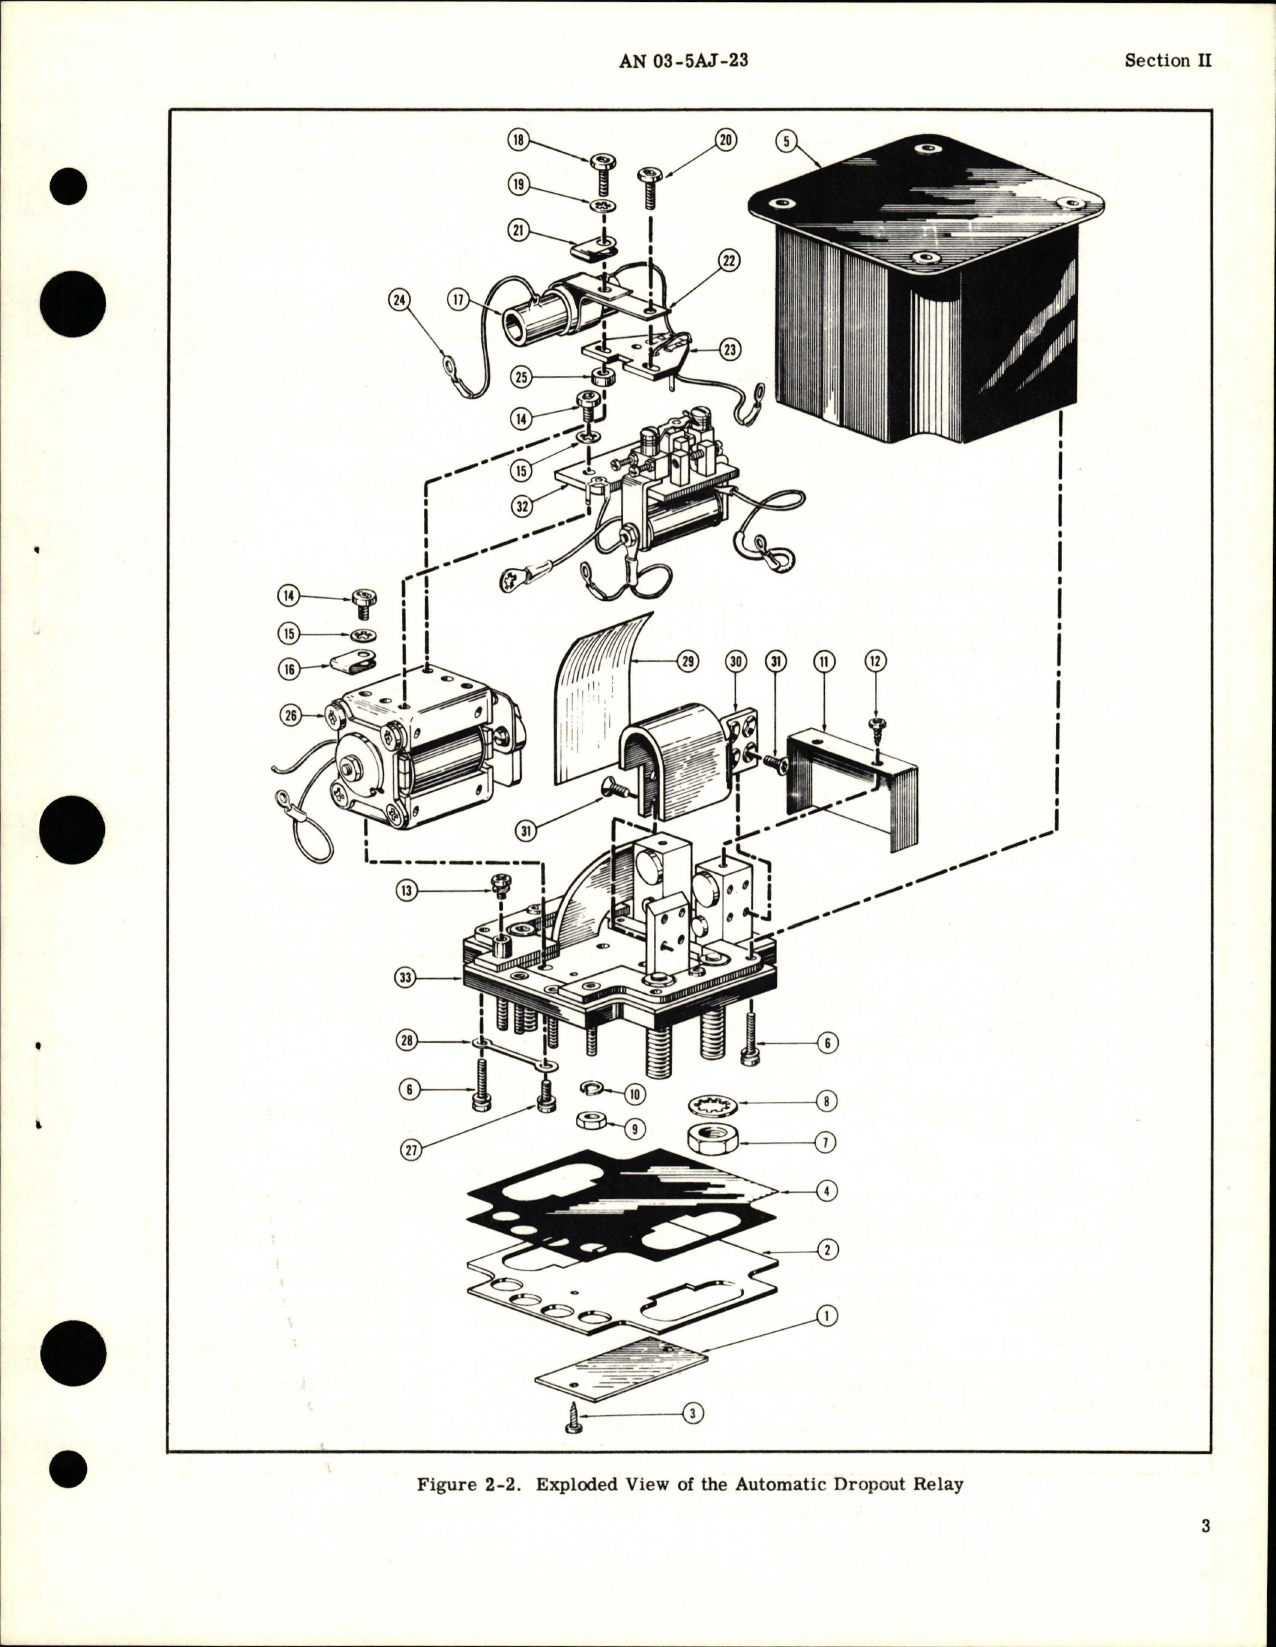 Sample page 7 from AirCorps Library document: Overhaul Instructions for Dropout Relay - Model A-711J and A-711K